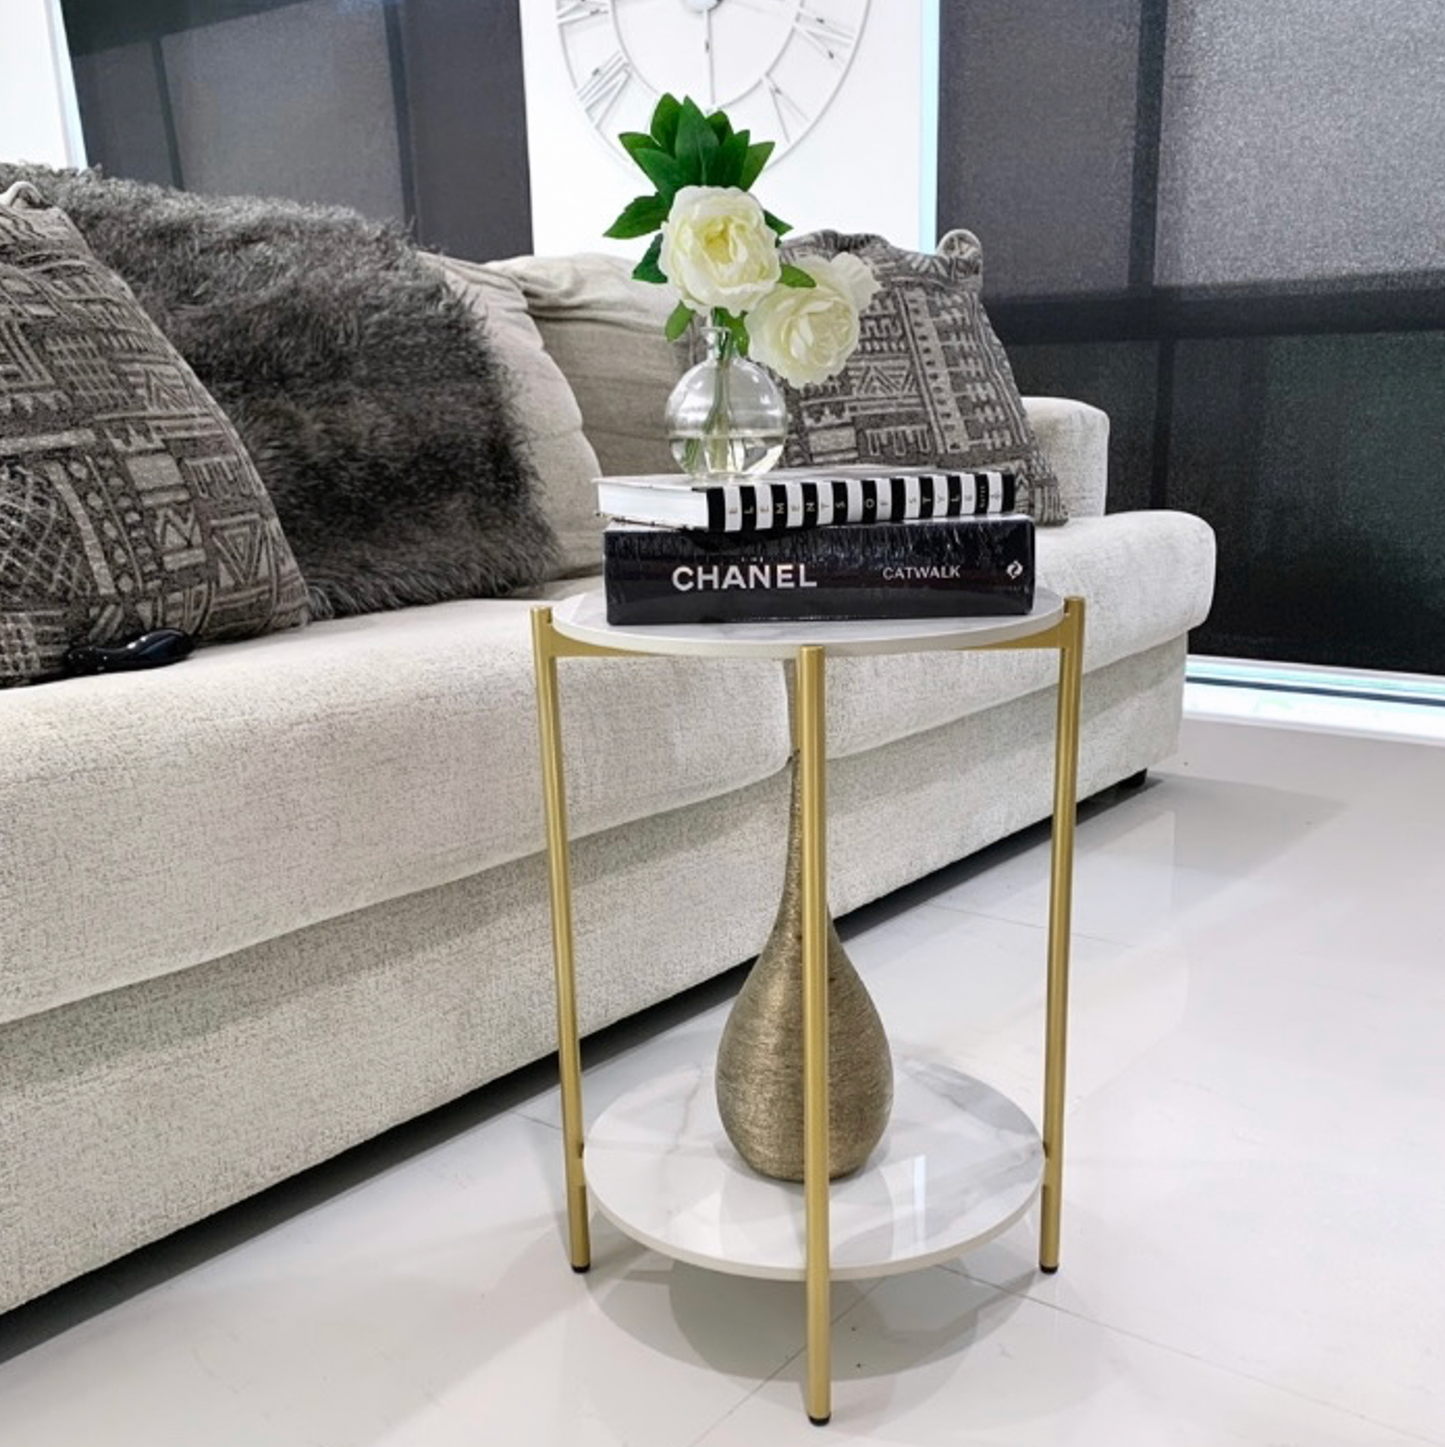 ALBA SIDE TABLE GOLD